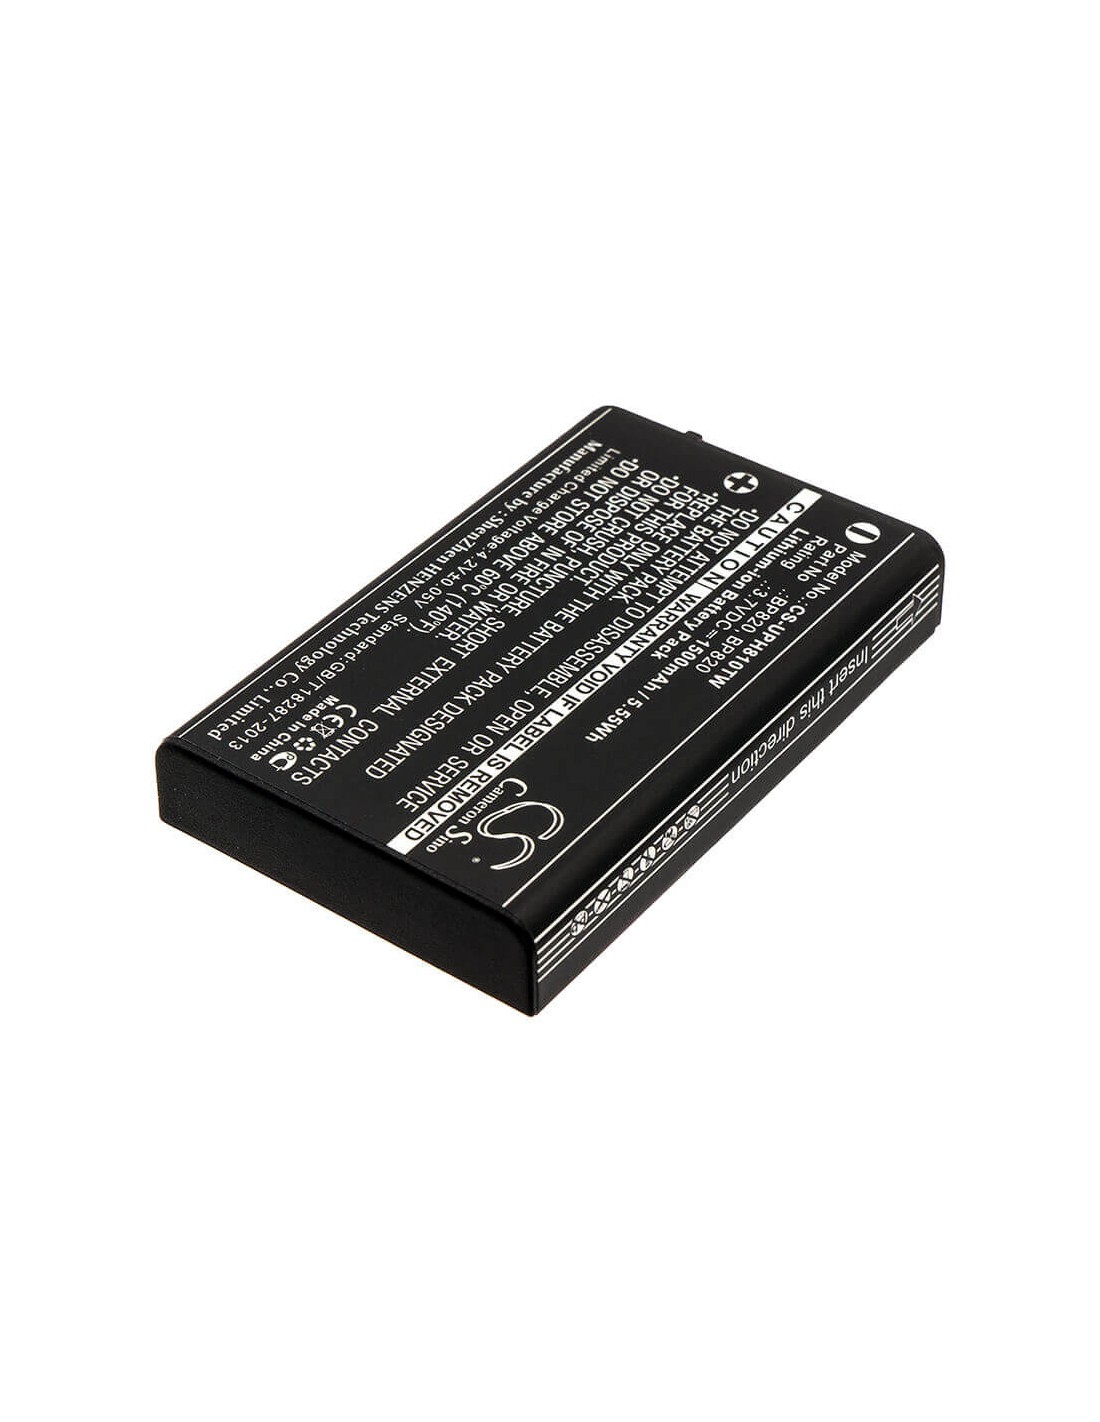 Battery for Uniden, Uh810, Uh810s, Uh820s 3.7V, 1500mAh - 5.55Wh